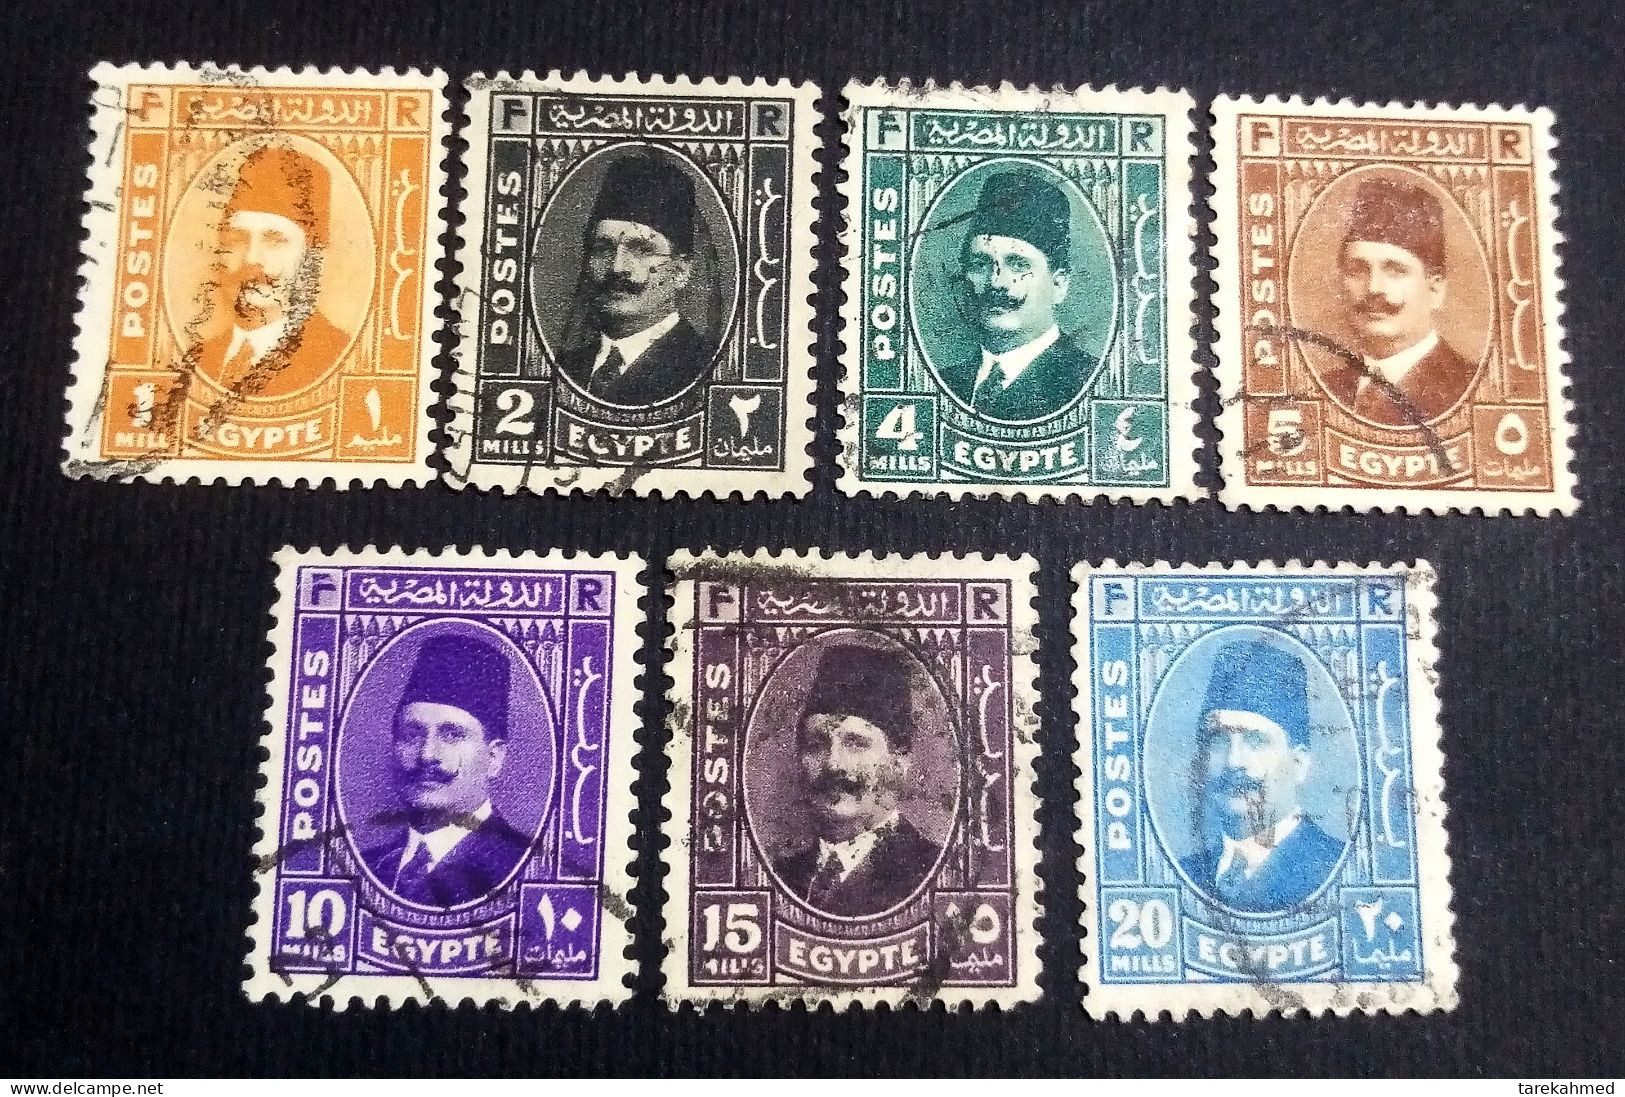 EGYPT 1927 , KING Fuad 2nd PORTRAIT, Complete SET OF 7stamps, VF - Used Stamps